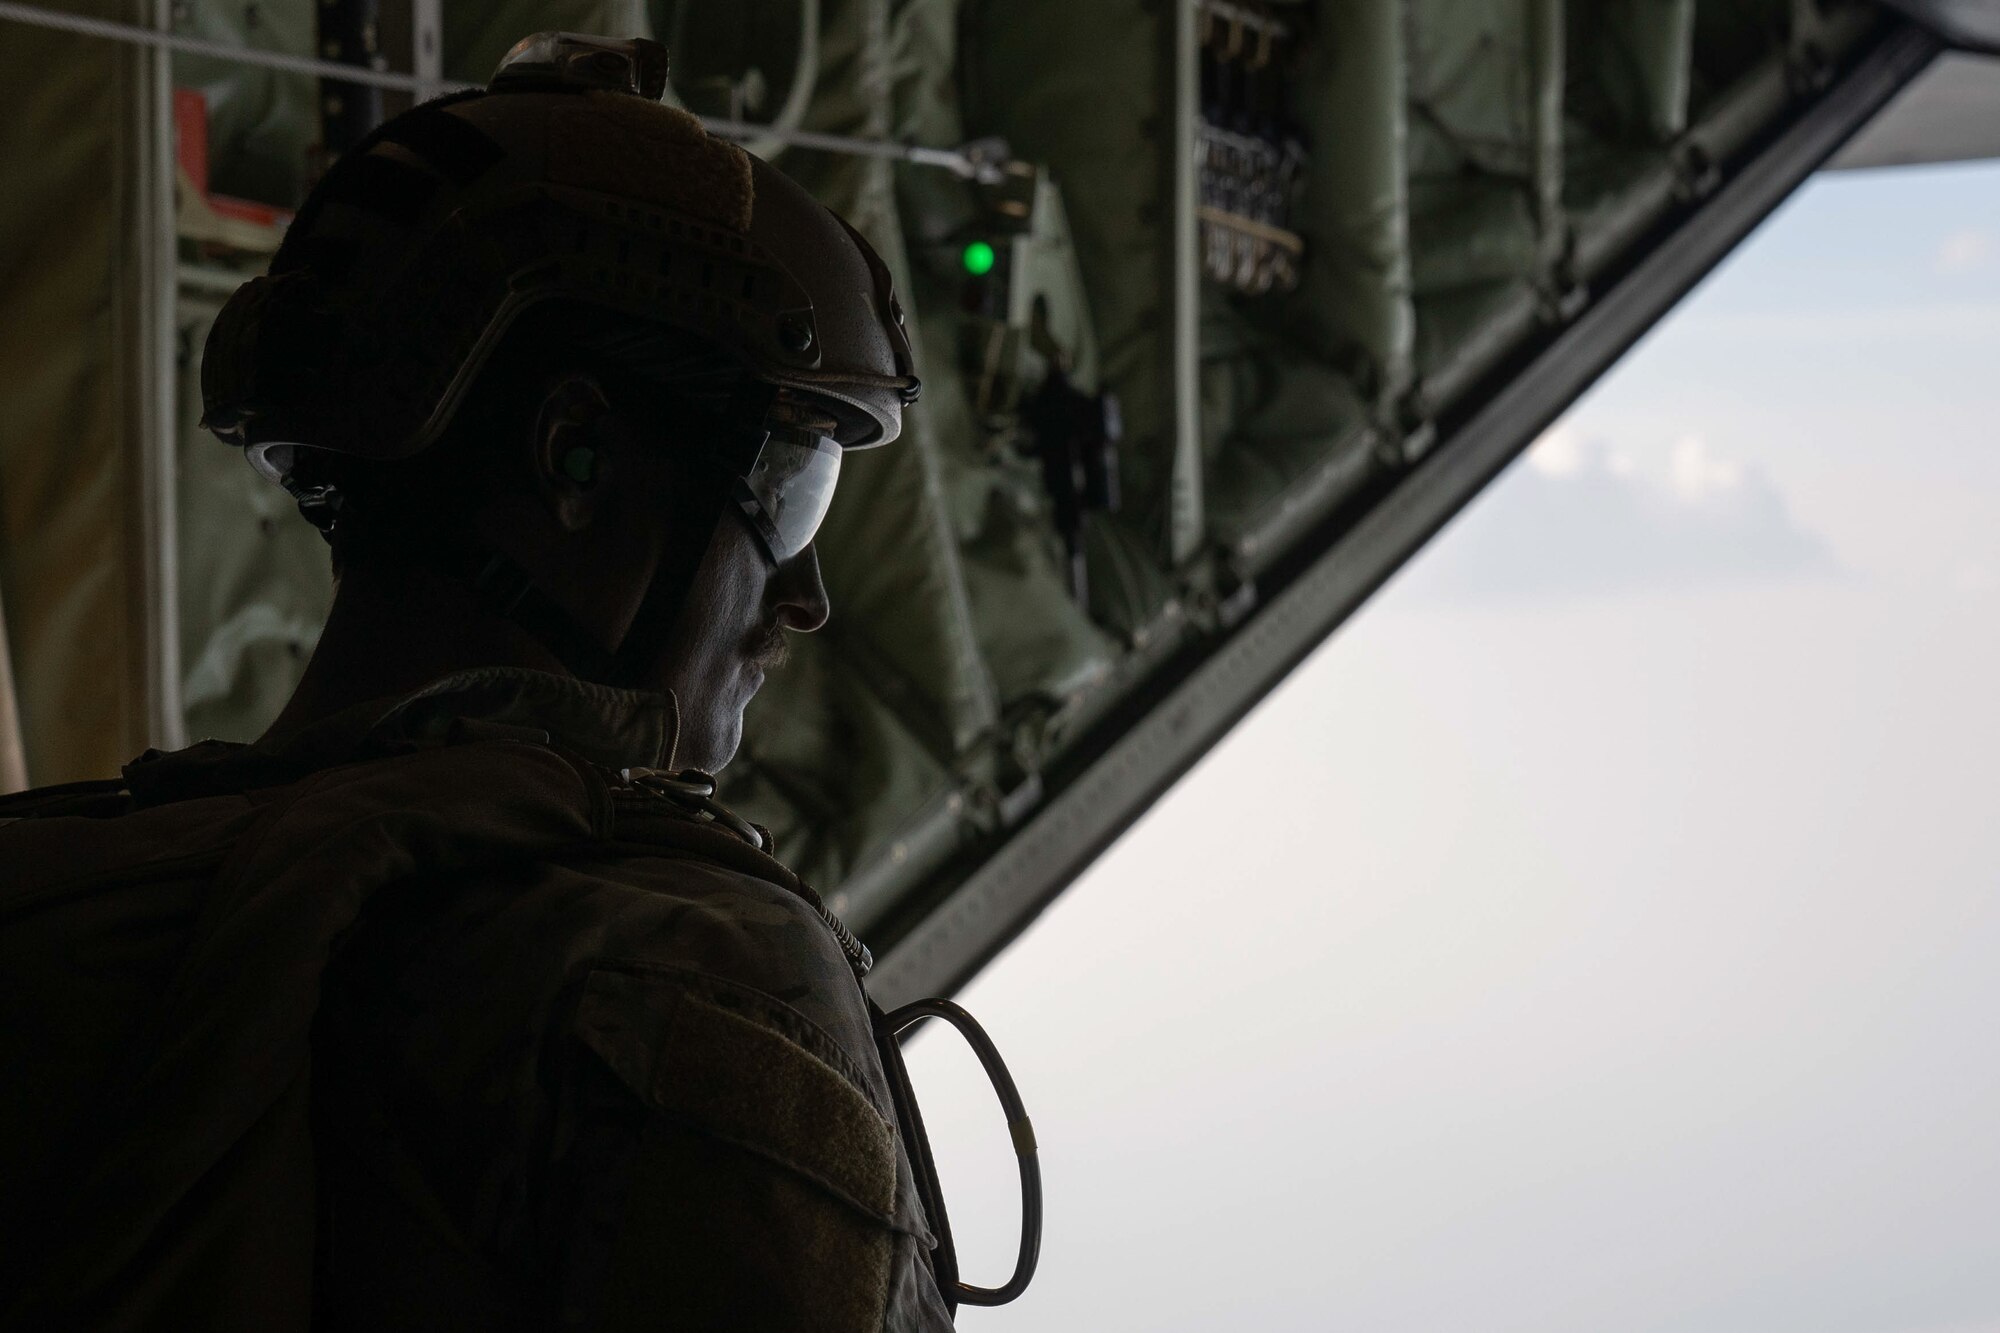 Paratroopers and Special Operations Unit conduct airborne operations